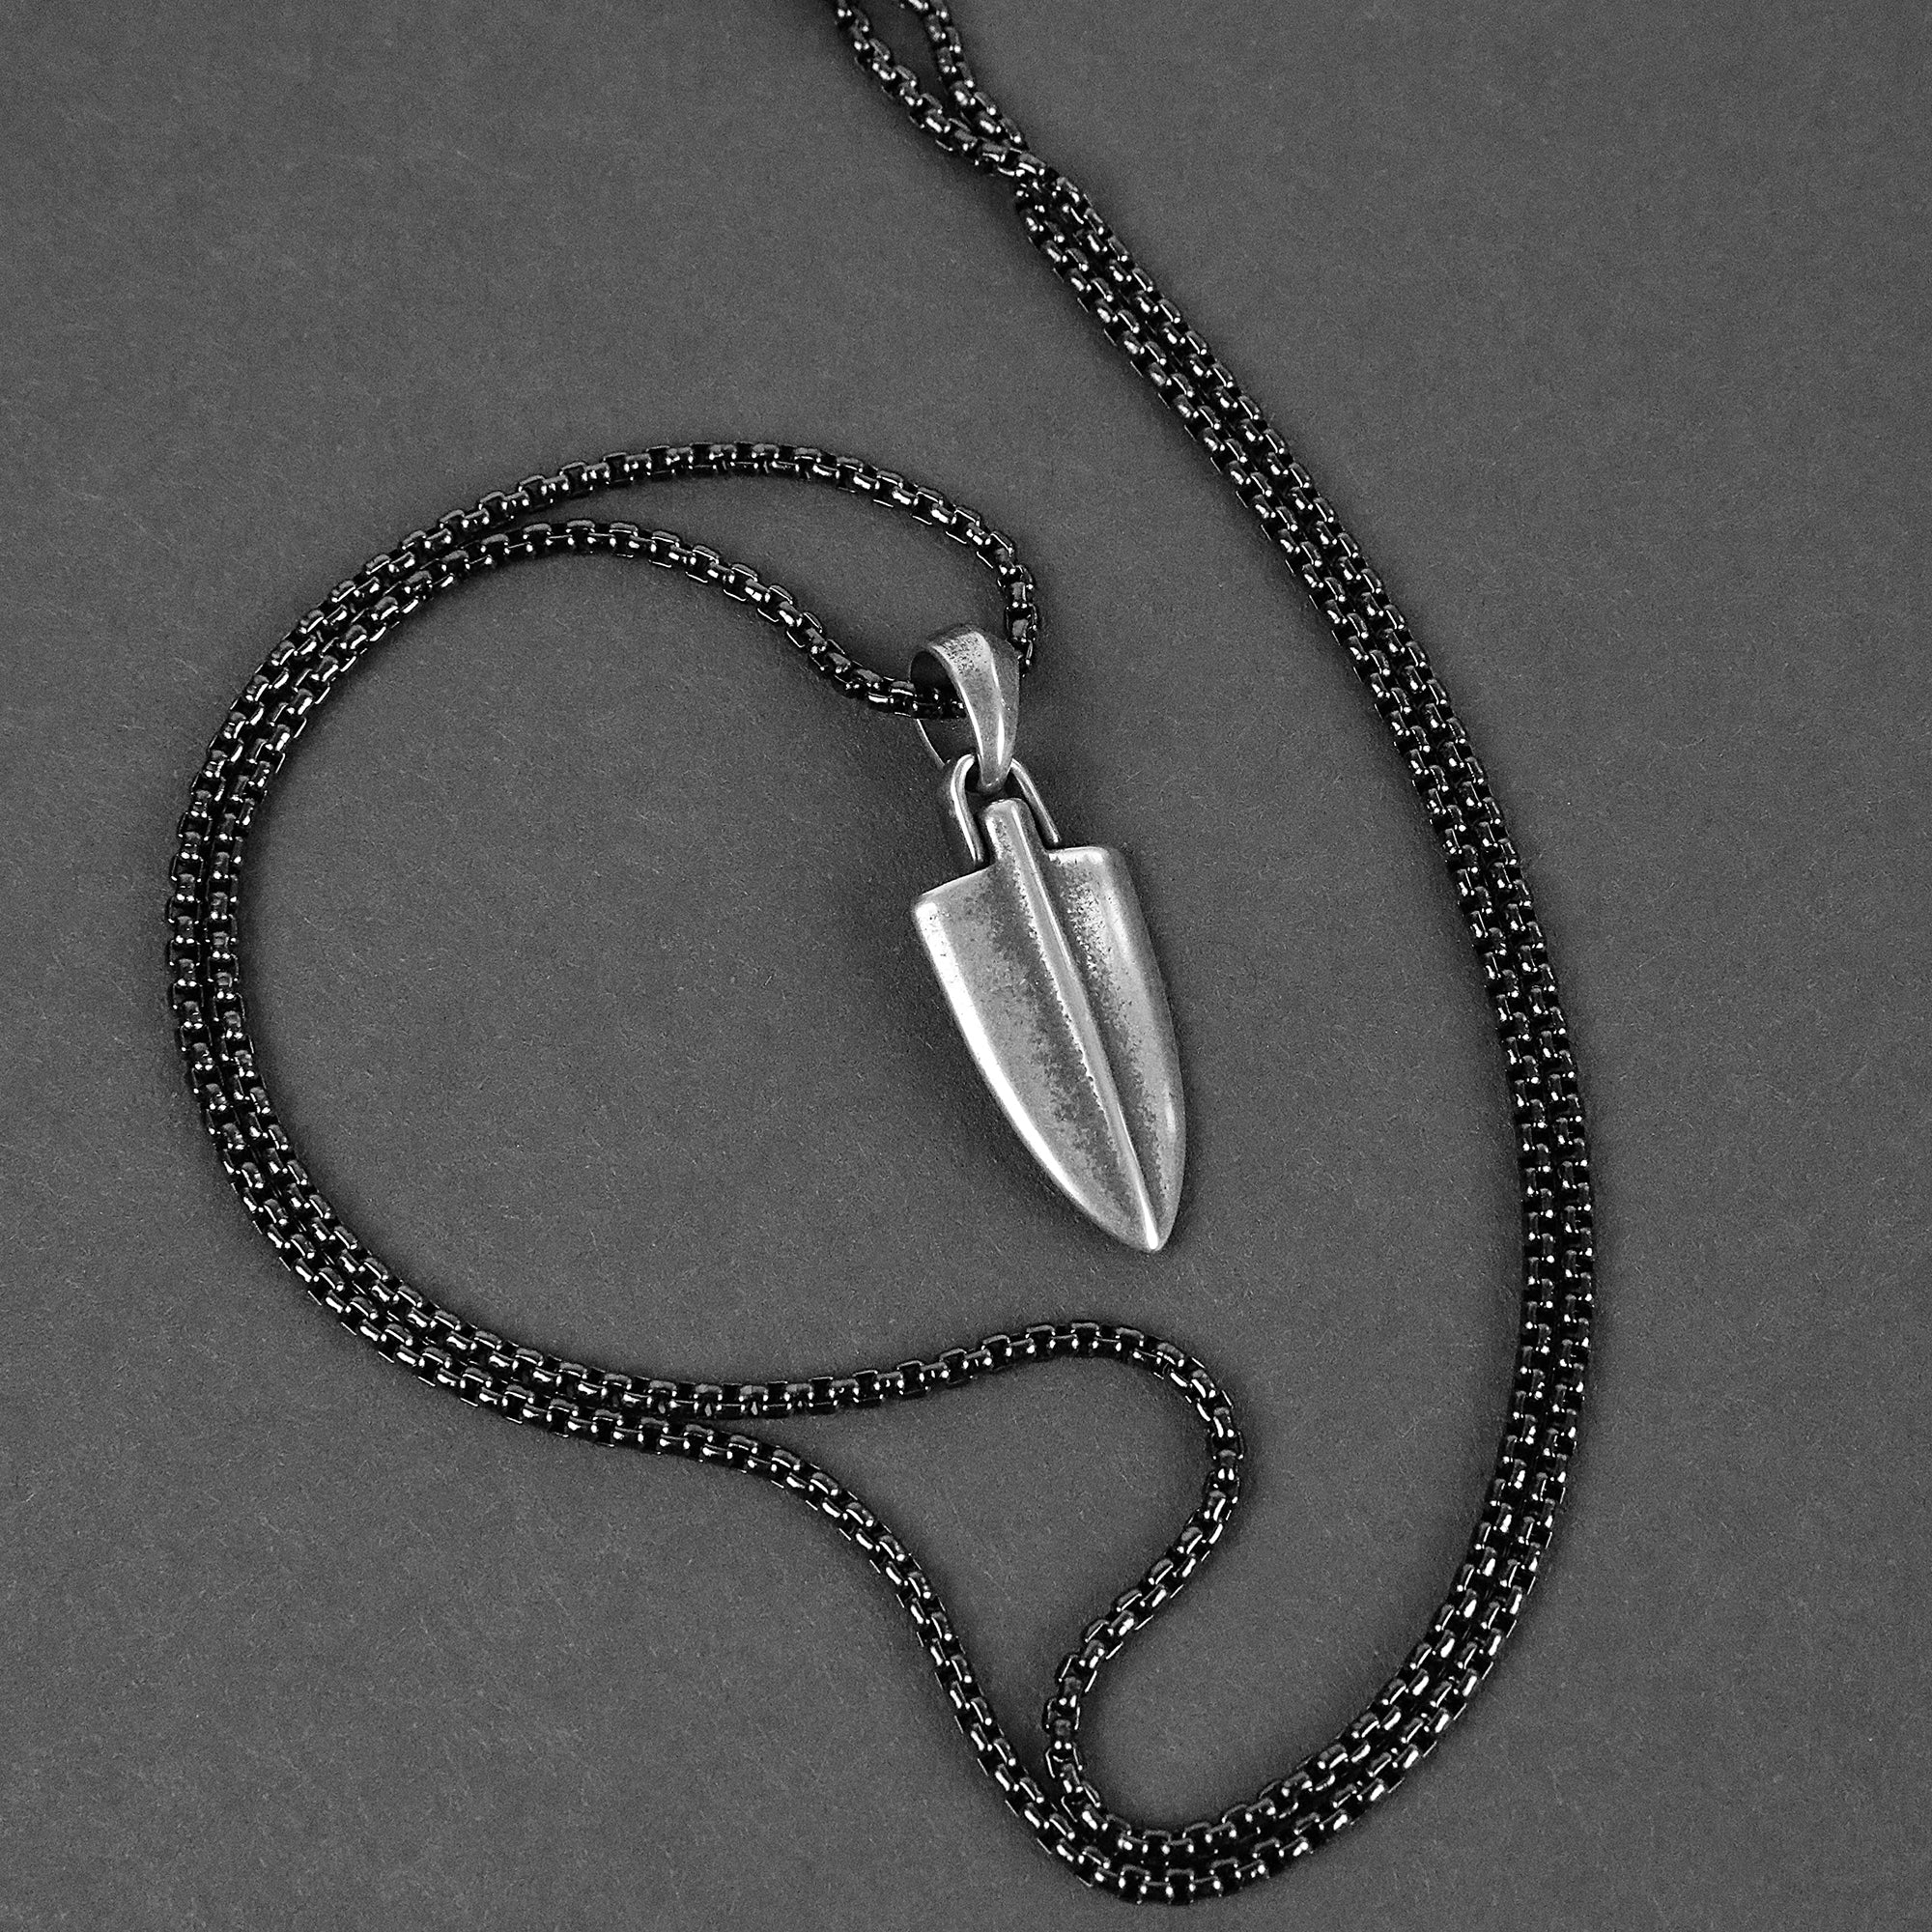 Small Spear Necklace - Antique Silver x Black